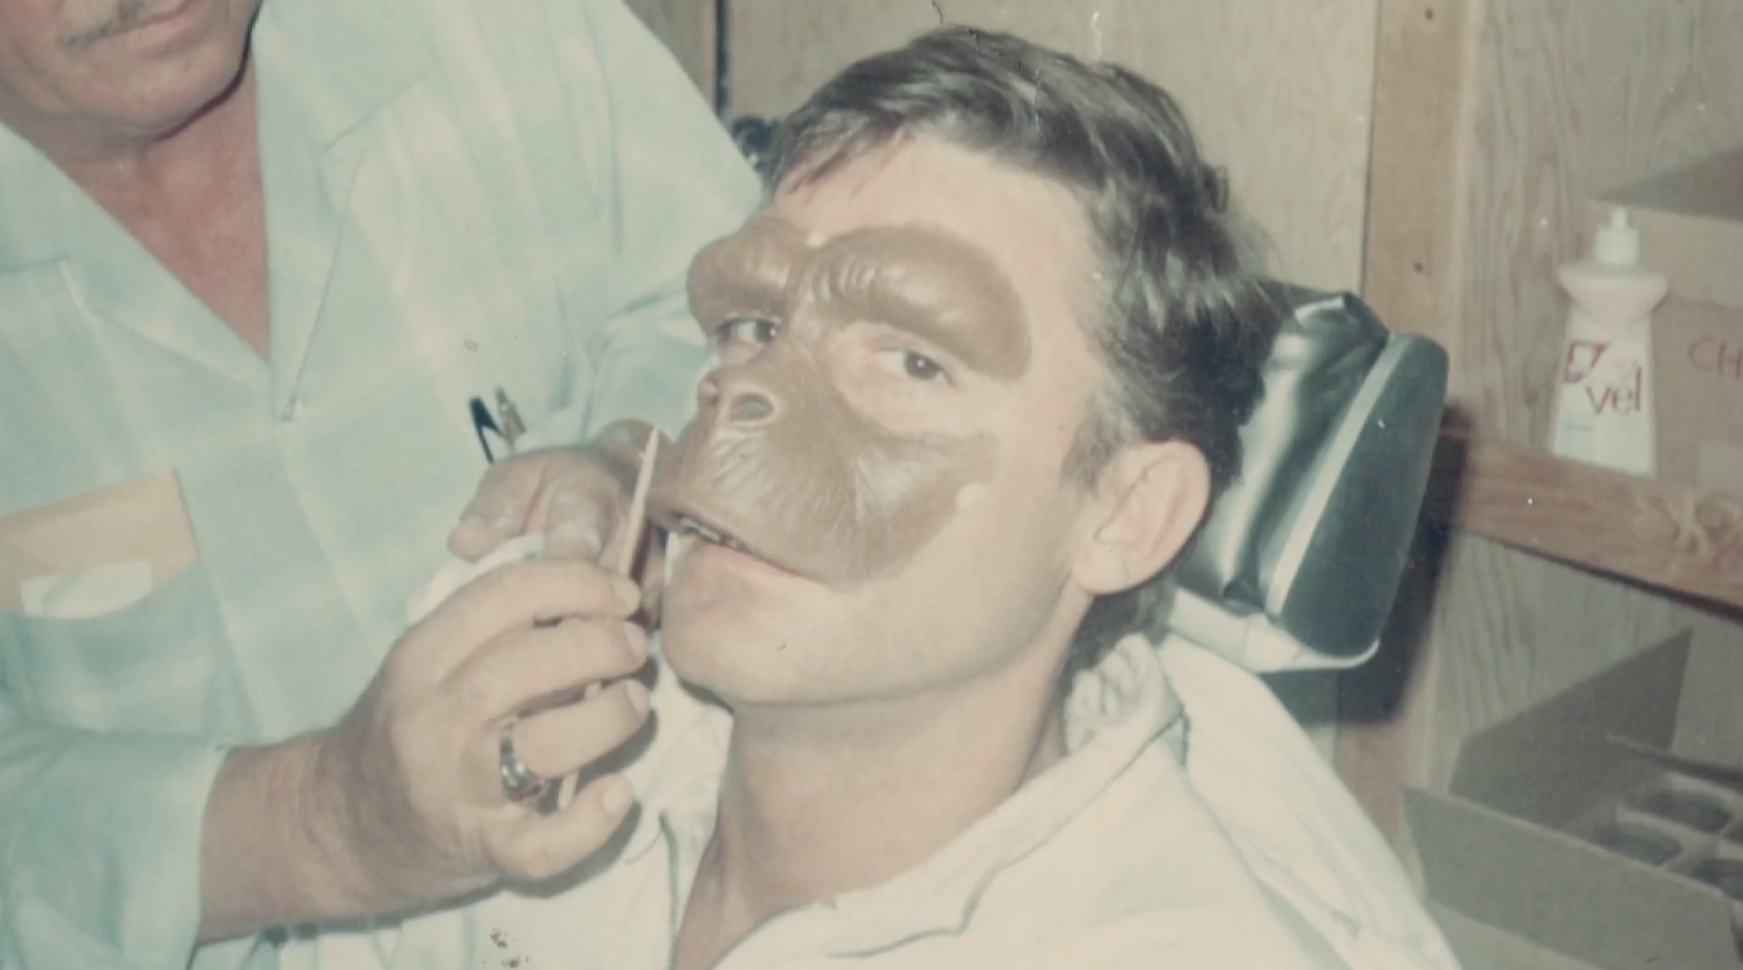 "Making Apes" Chronicles the Pain, Passion, & Prosthetics Behind "Planet of the Apes"